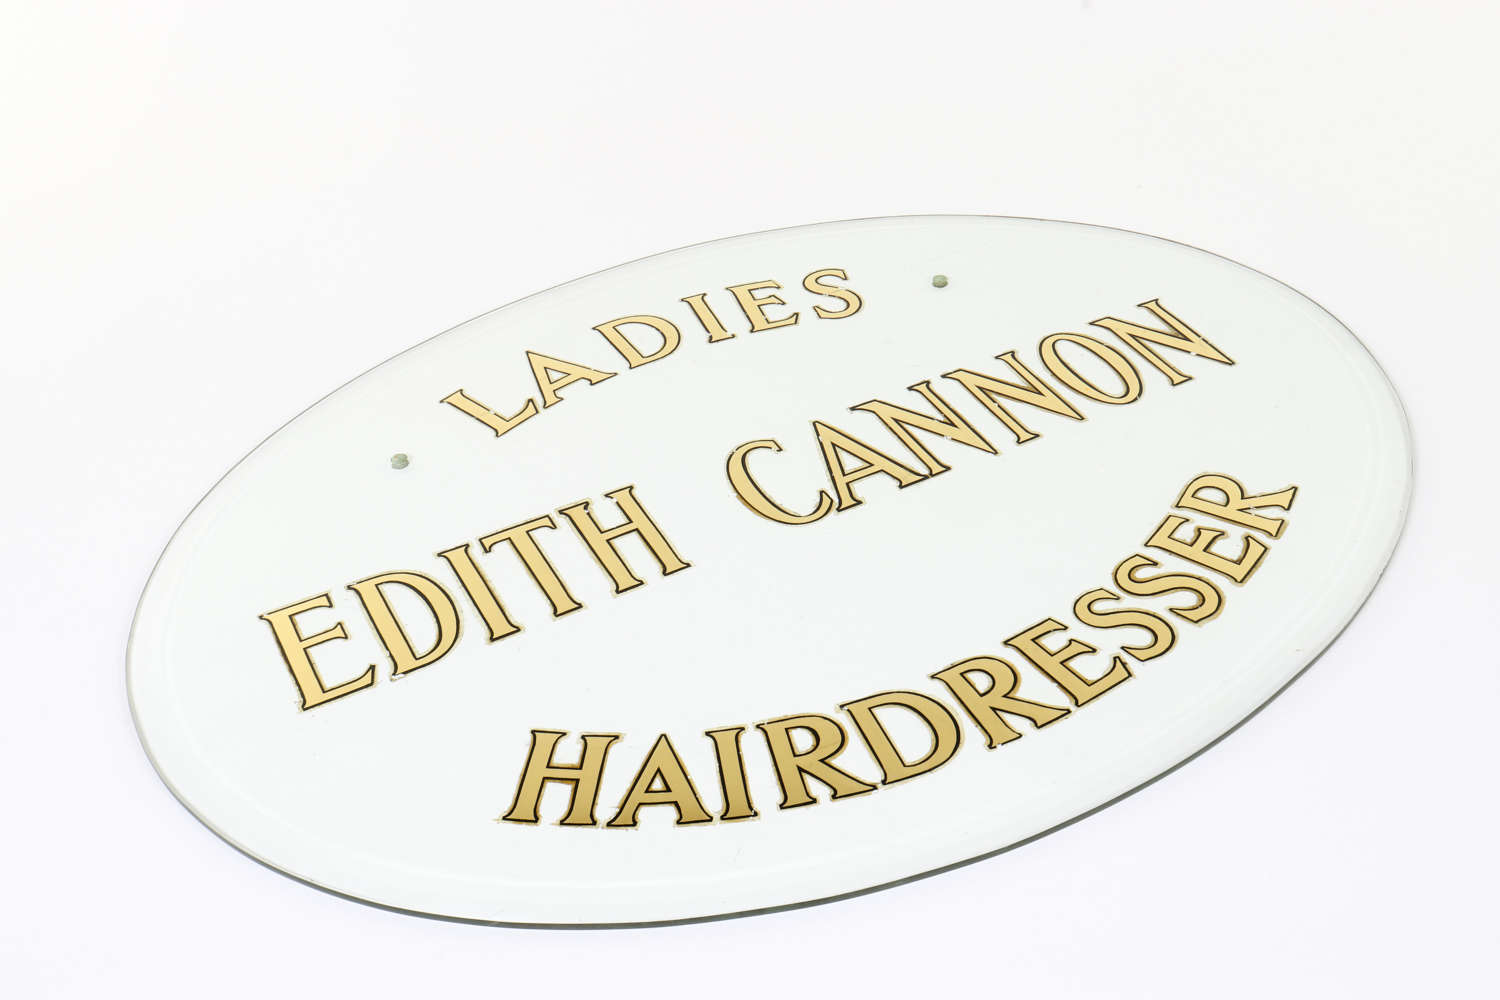 'Edith Cannon - Ladies Hairdresser' glass sign